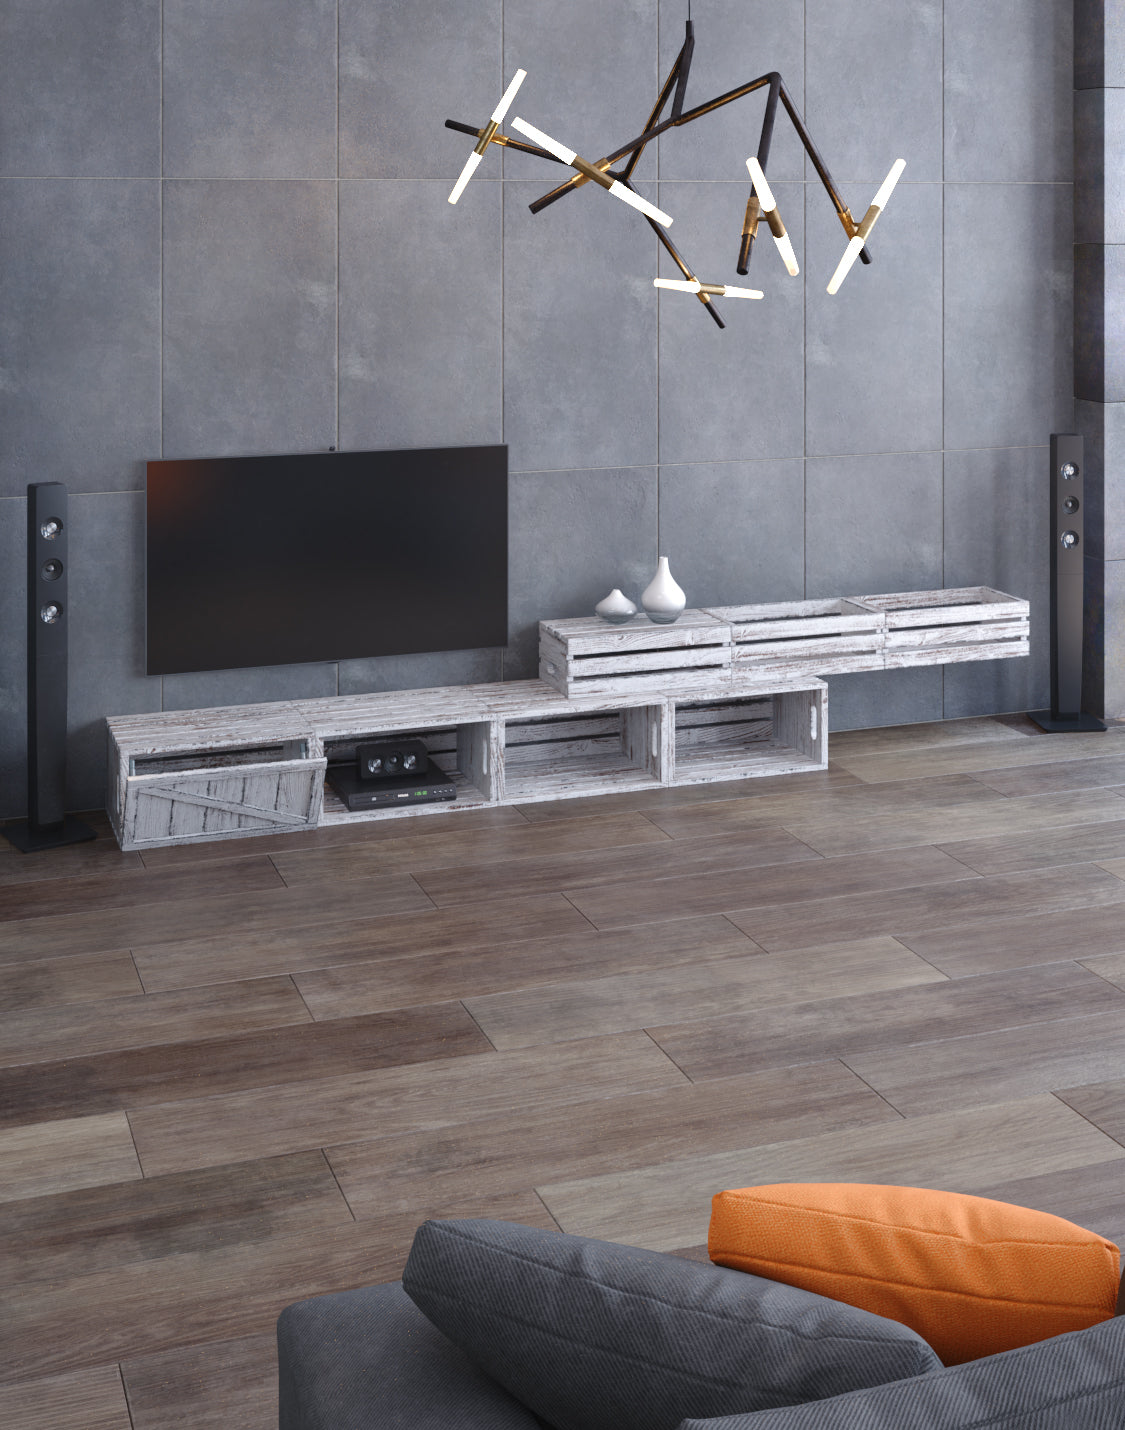 Pieng TV Unit Modular And real wood furniture product